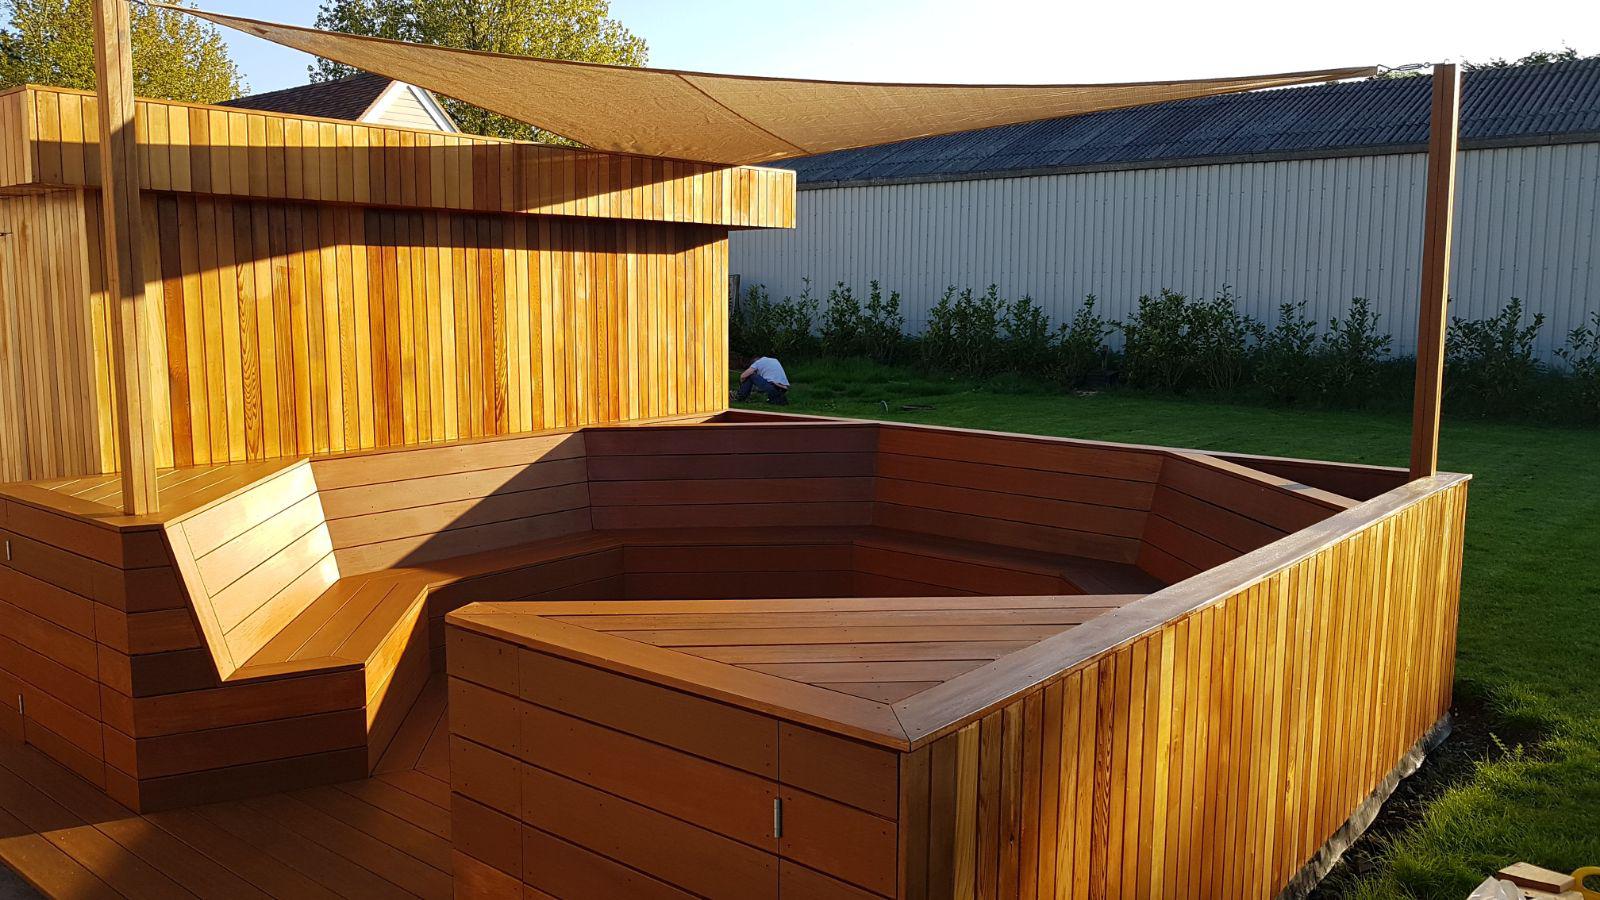 A combination of Yellow Balau and Western Red Cedar